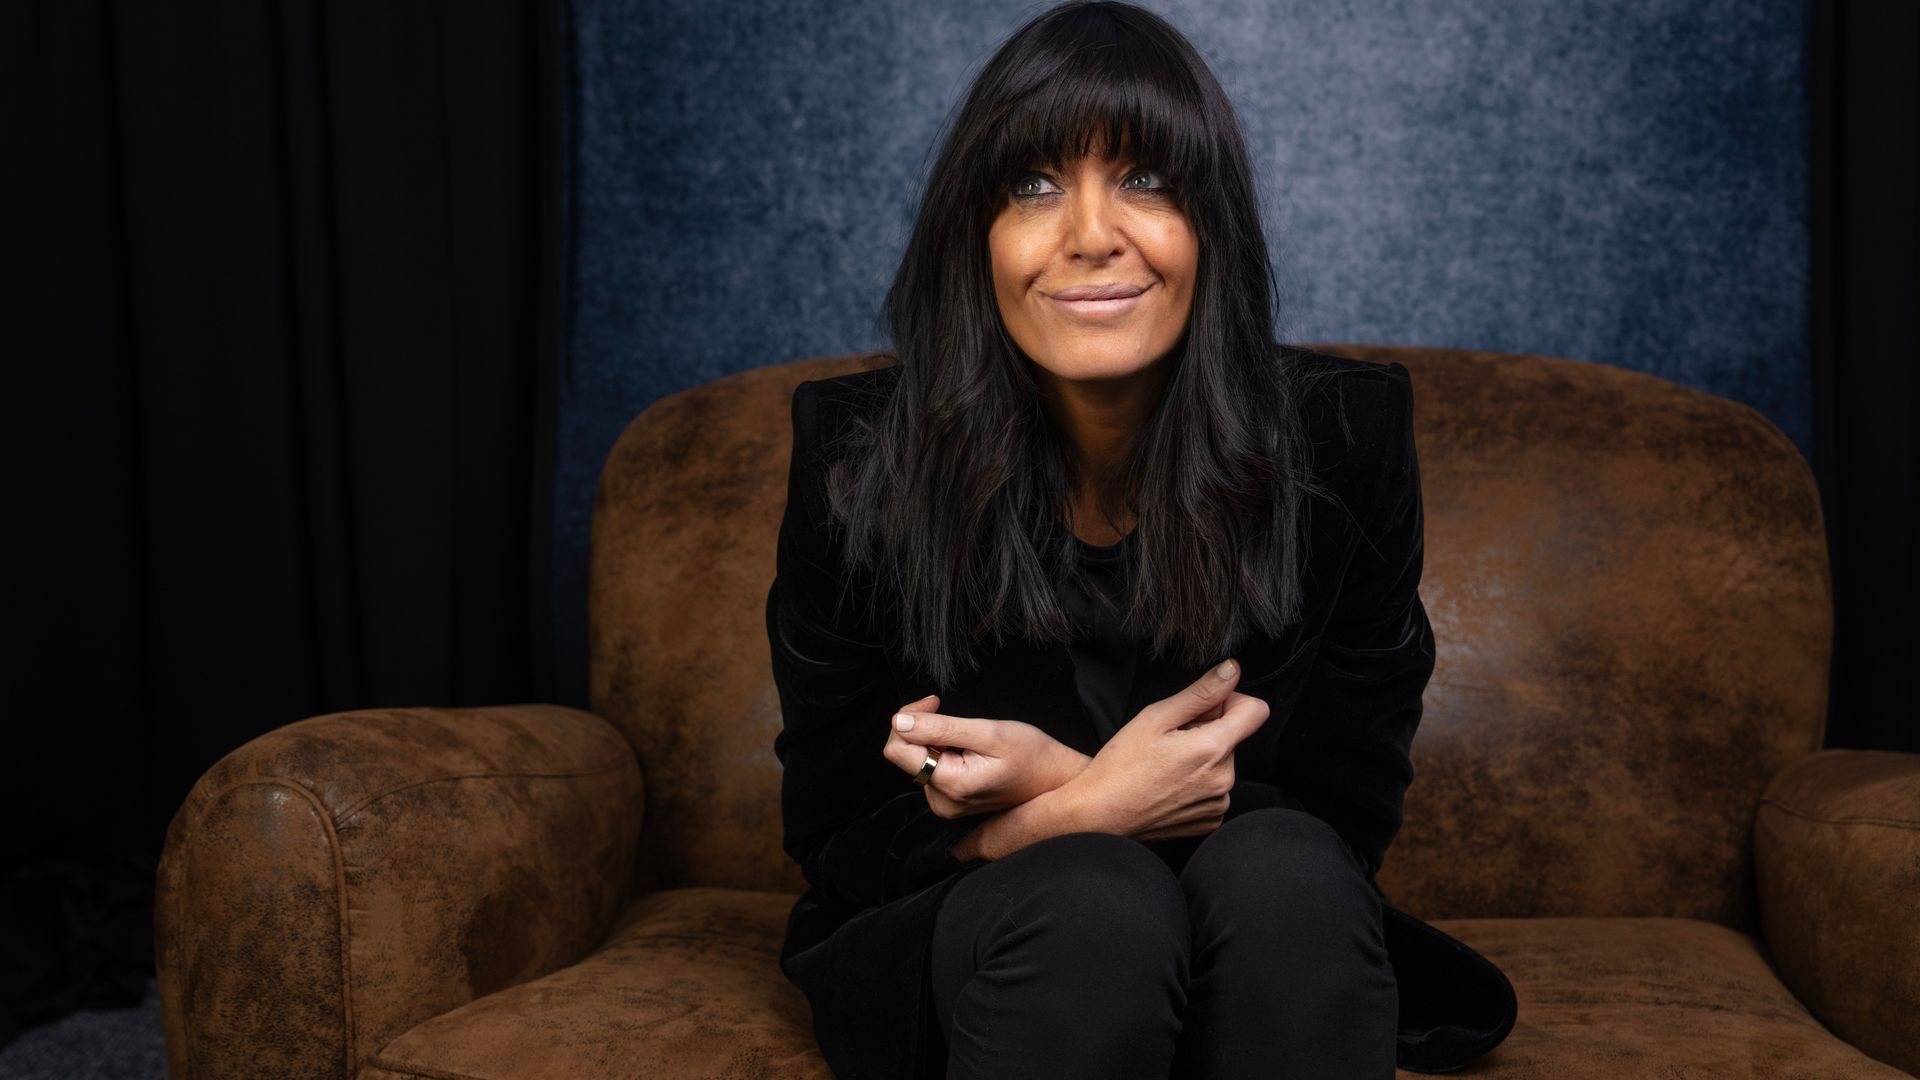 Claudia Winkleman in black on a a brown chair